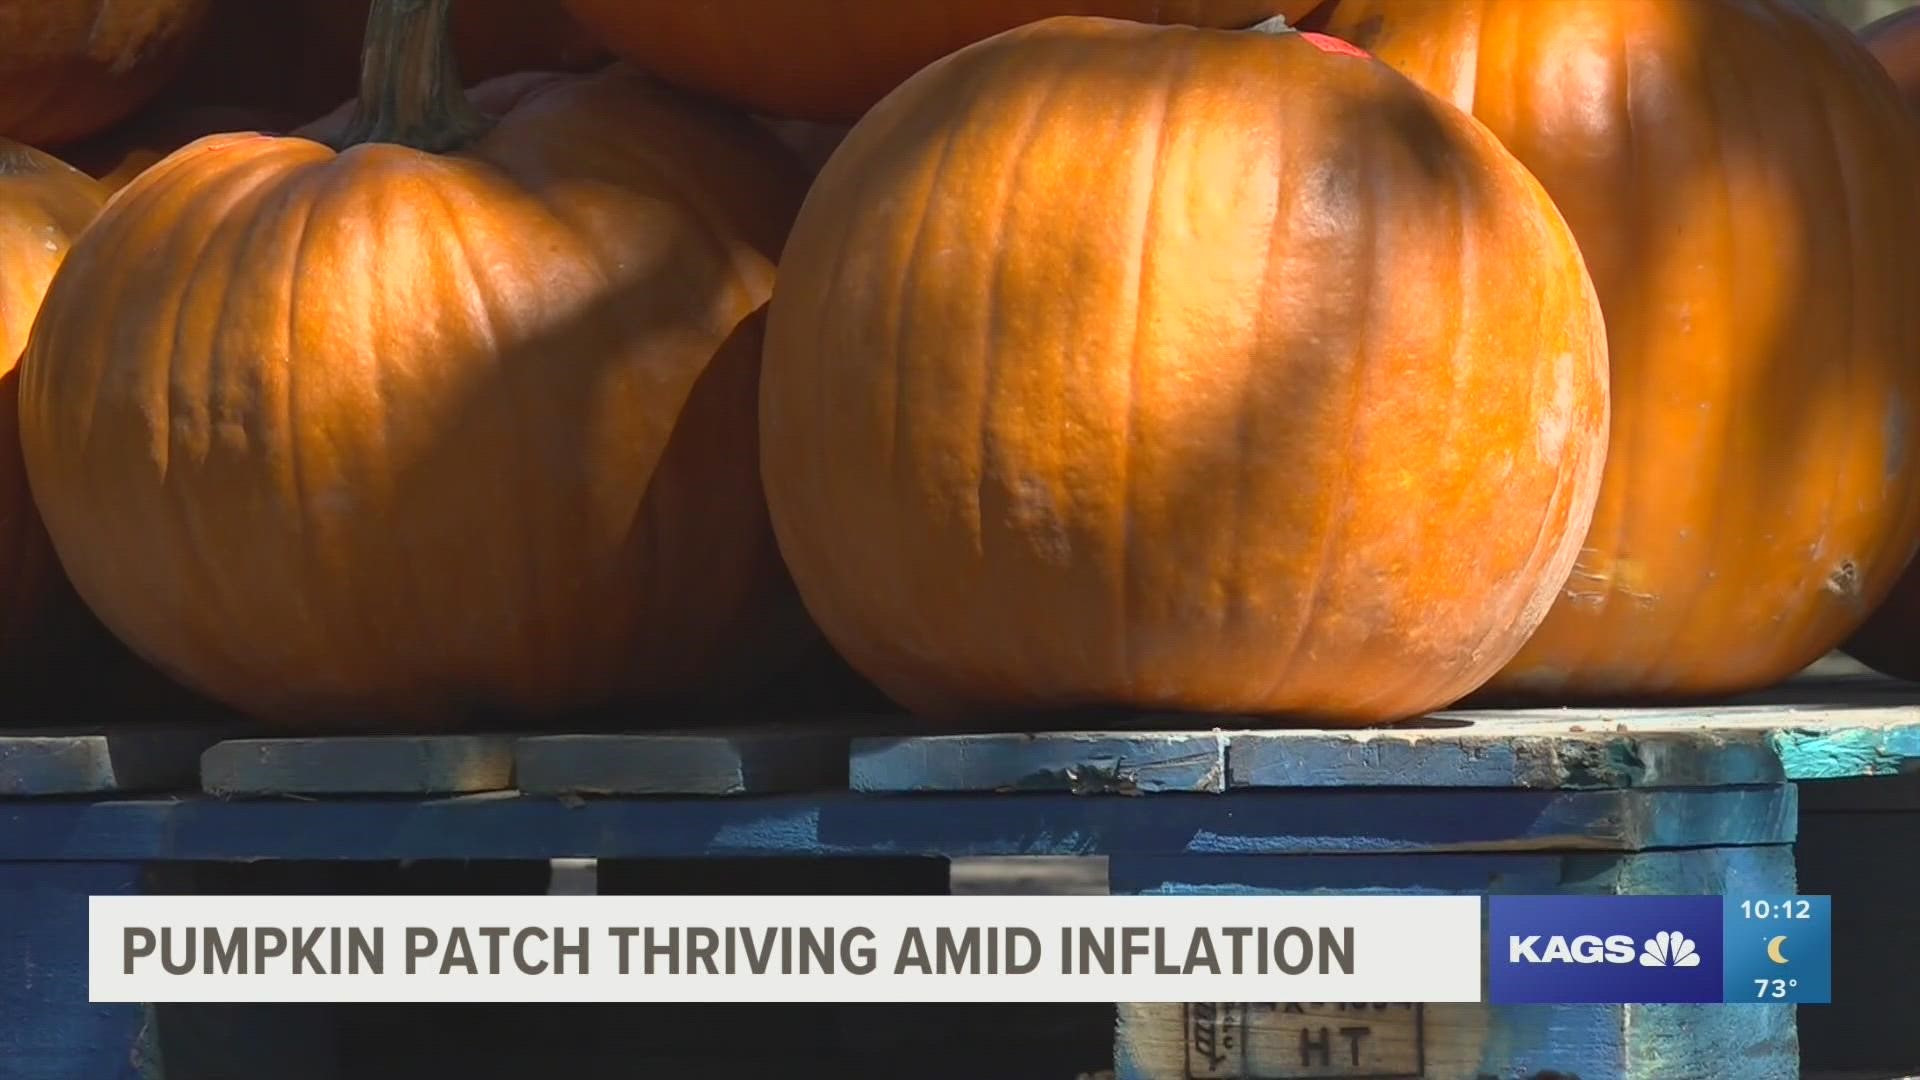 The Farm Patch opened in 1975, and despite persistent inflation and sporadic temperatures, they are still able to host their month long Pumpkin patch.